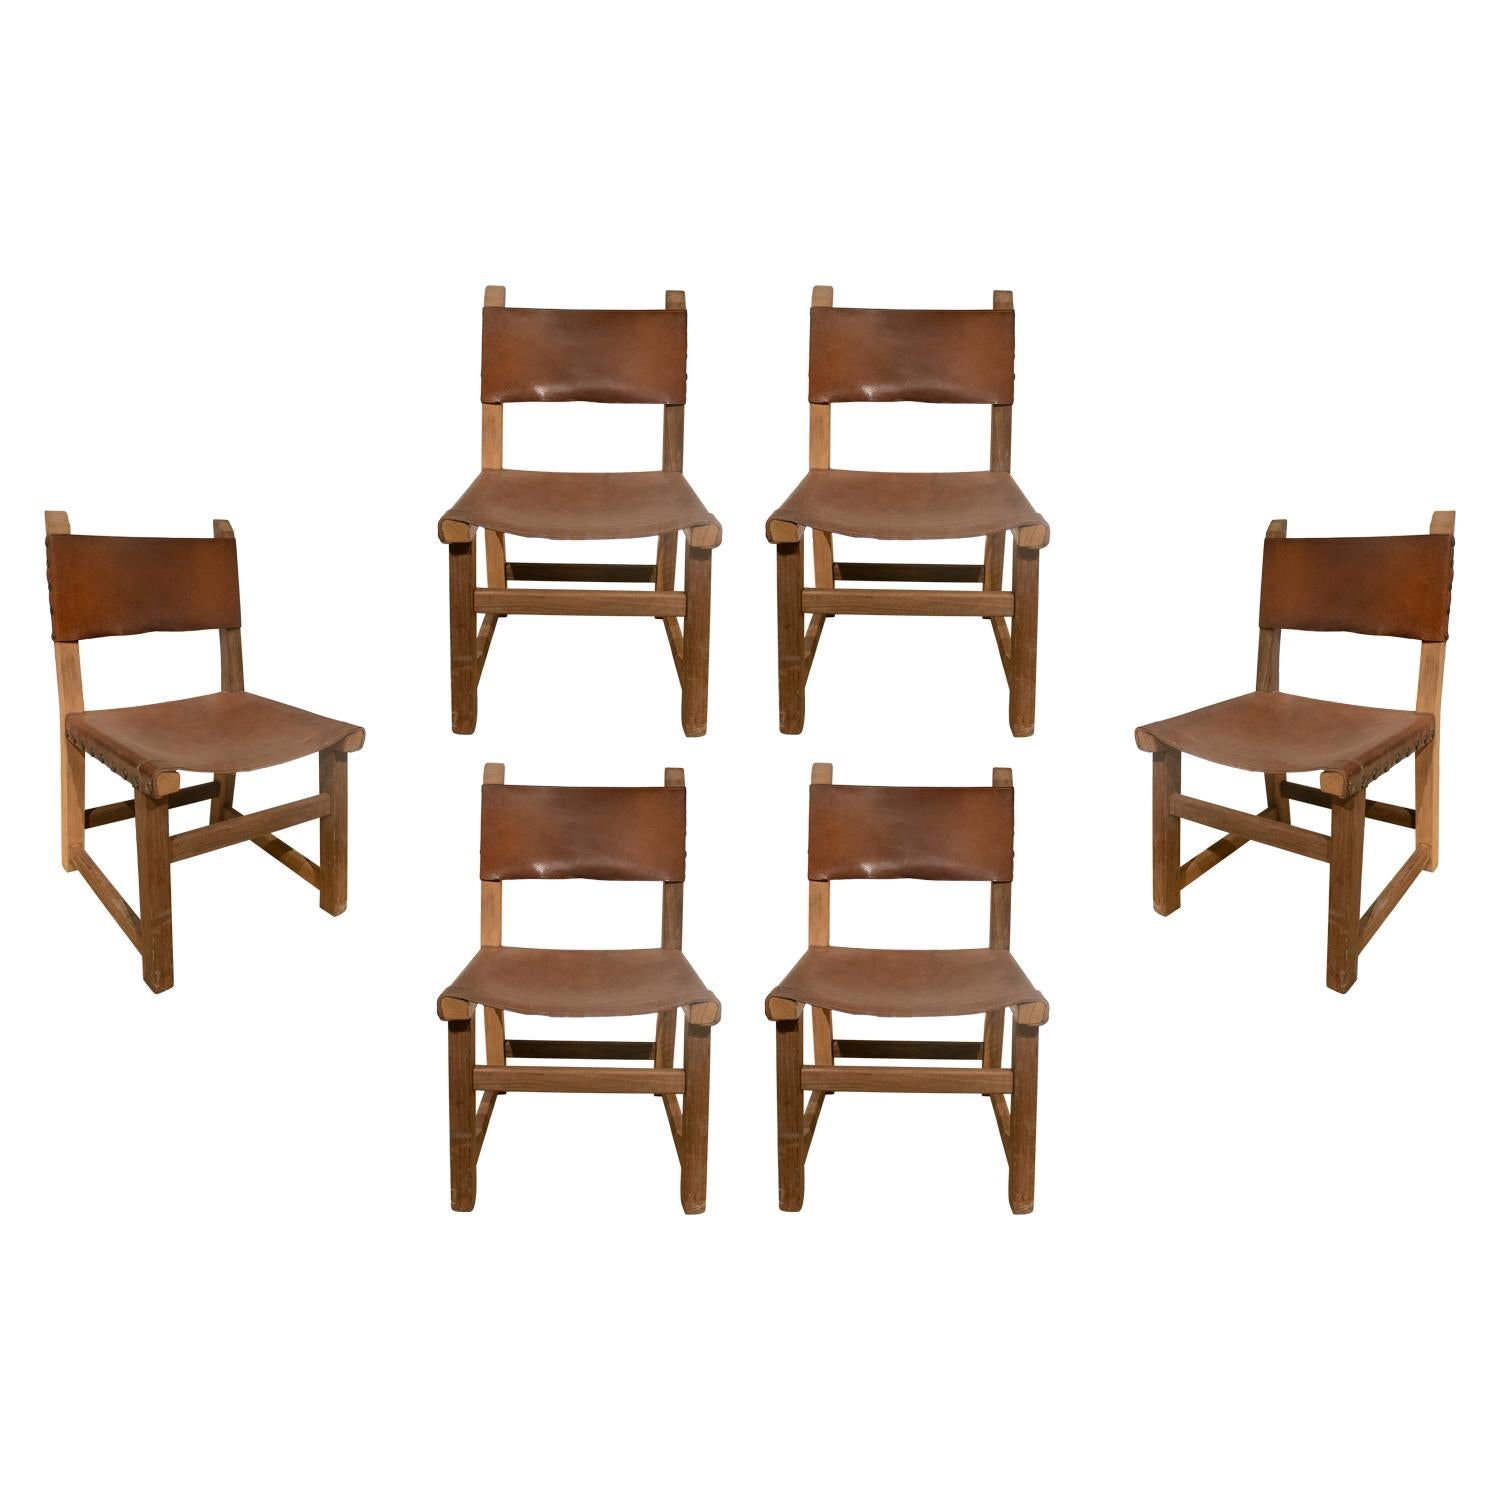 1960s Set of Six Spanish Wood & Leather Chairs